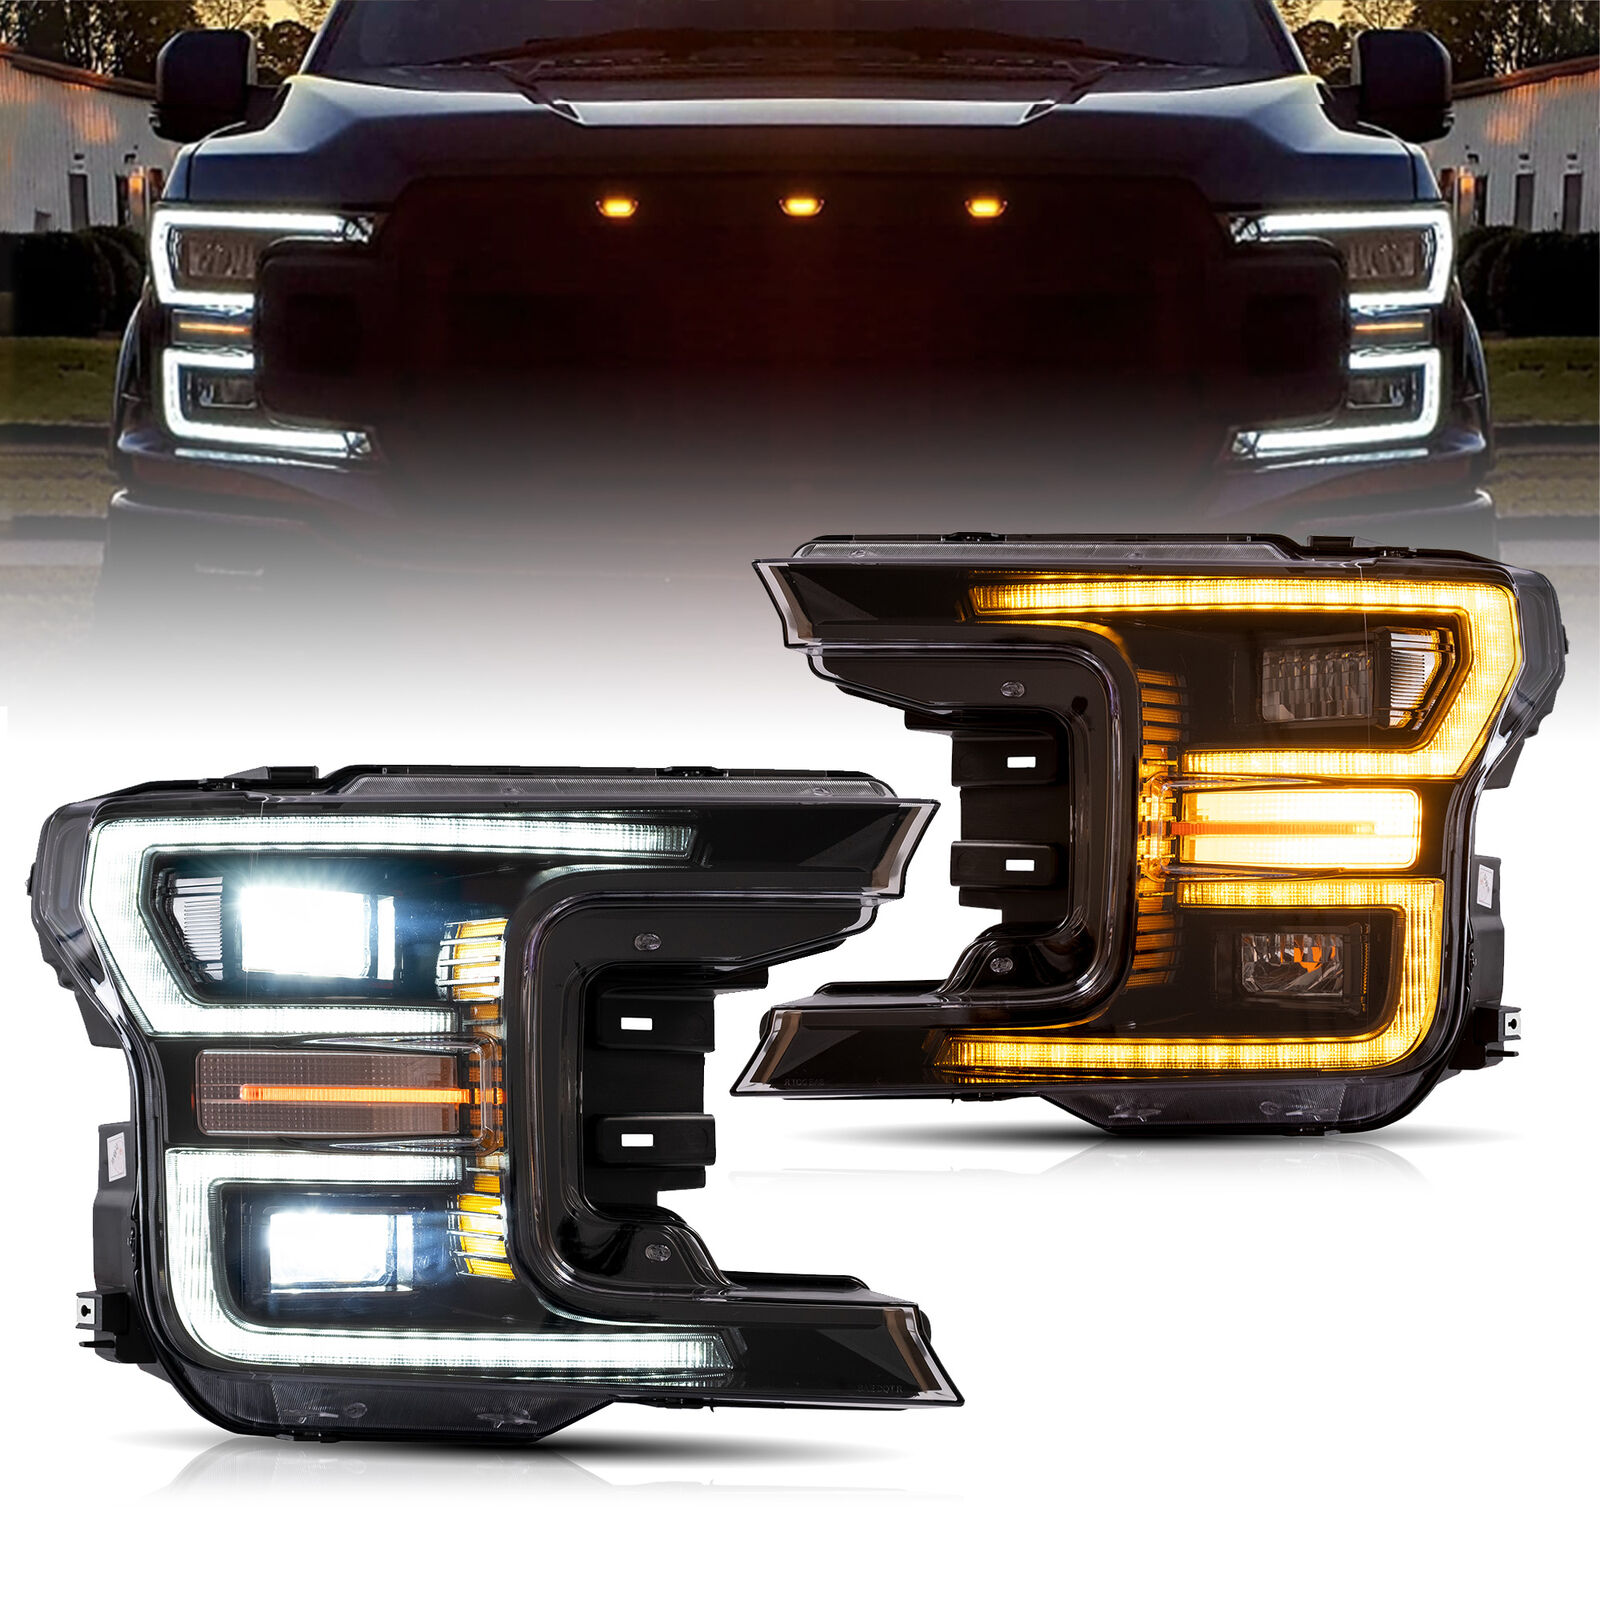 VLAND LED Headlights Sequential Turn Signal Fit Ford F-150 2018-2020 Black Pair